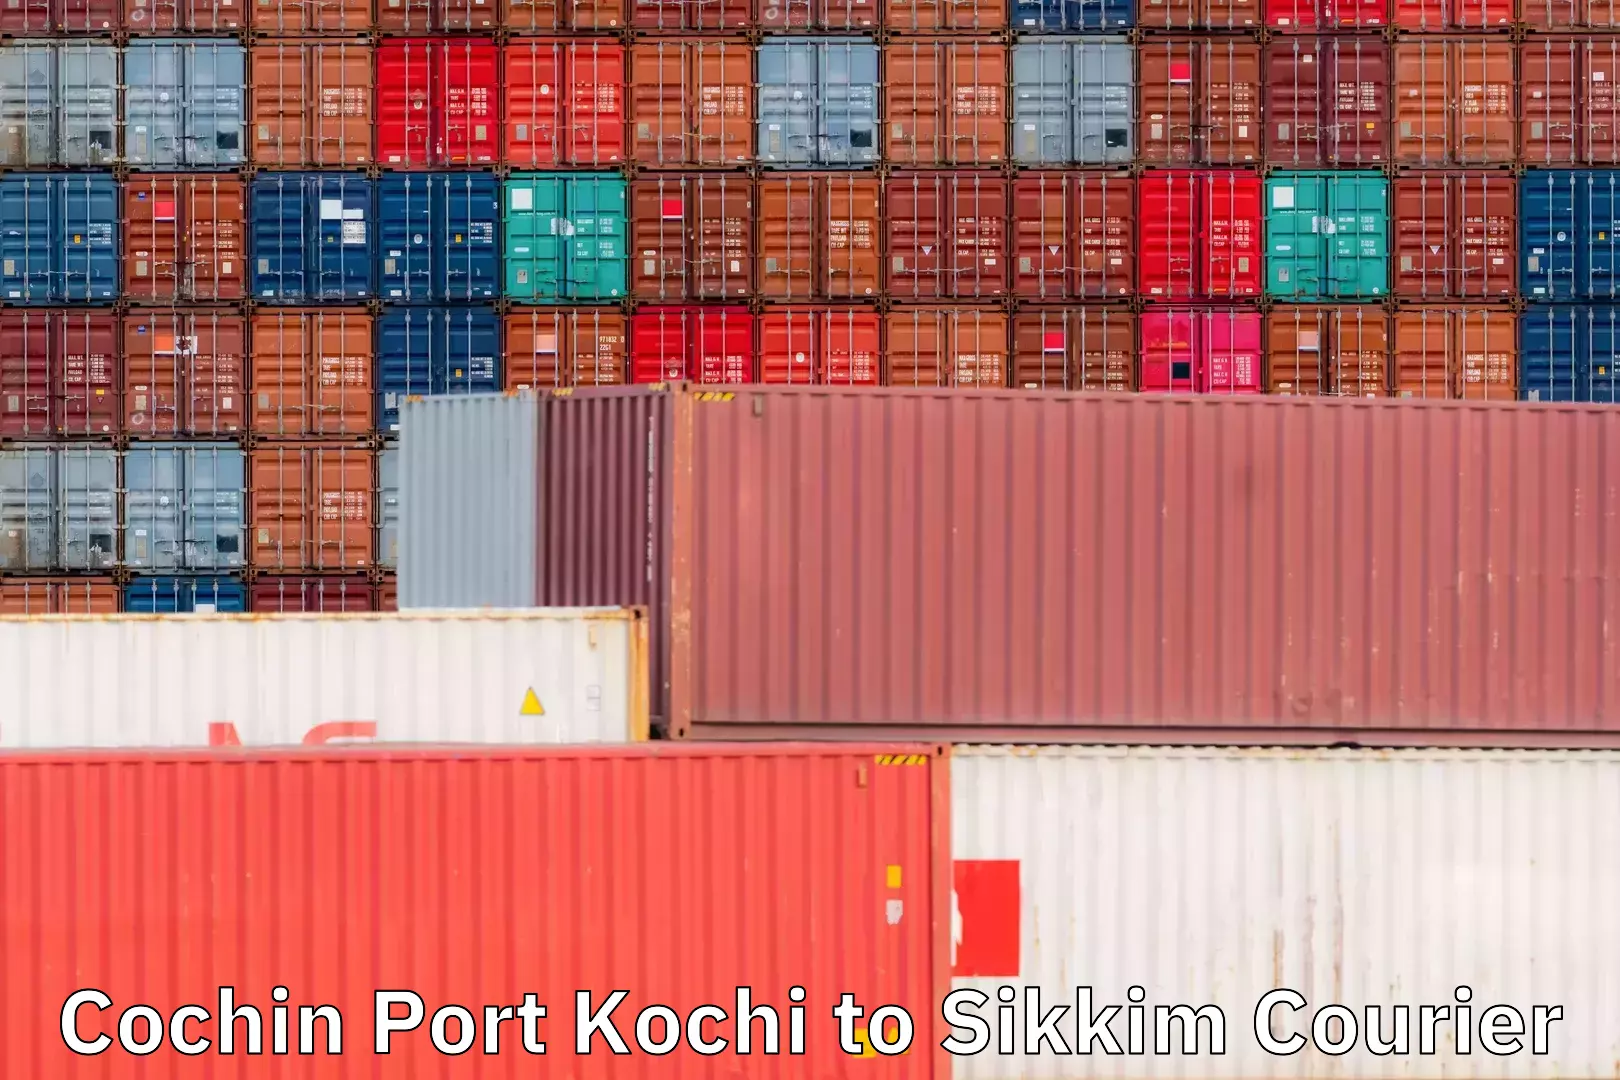 Optimized shipping services Cochin Port Kochi to Sikkim